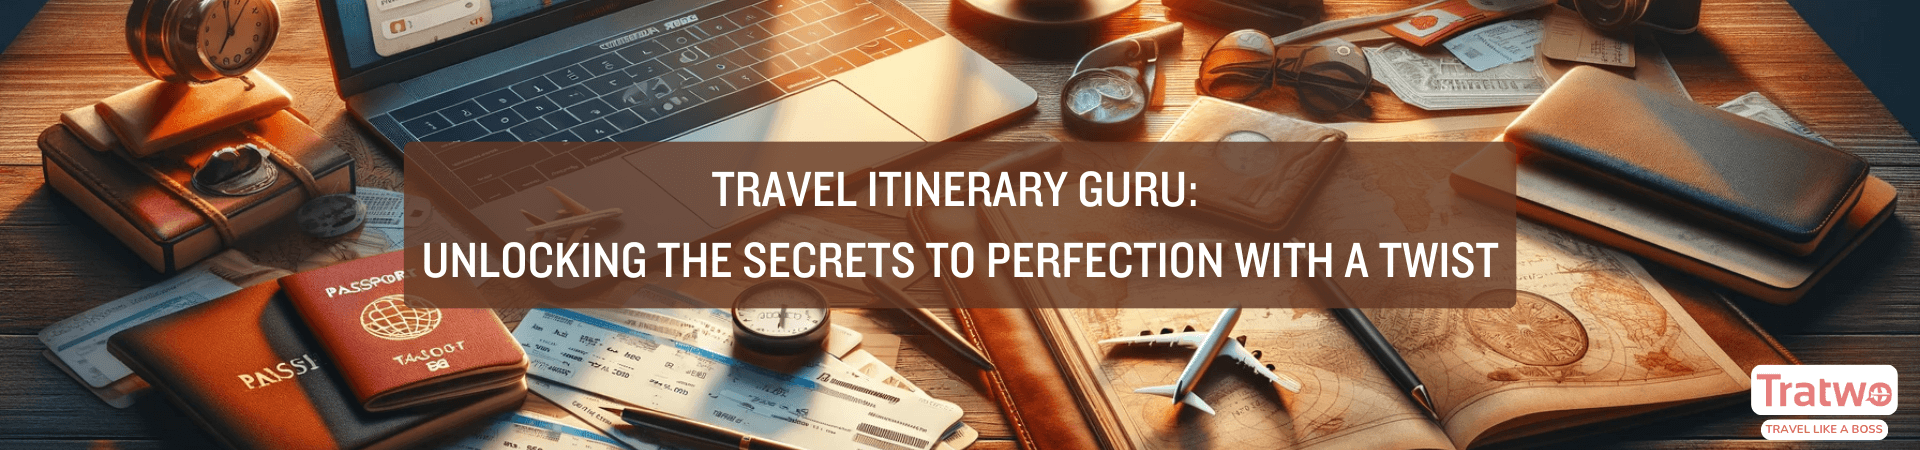 Travel Itinerary Guru: Unlocking the Secrets to Perfection with a Twist